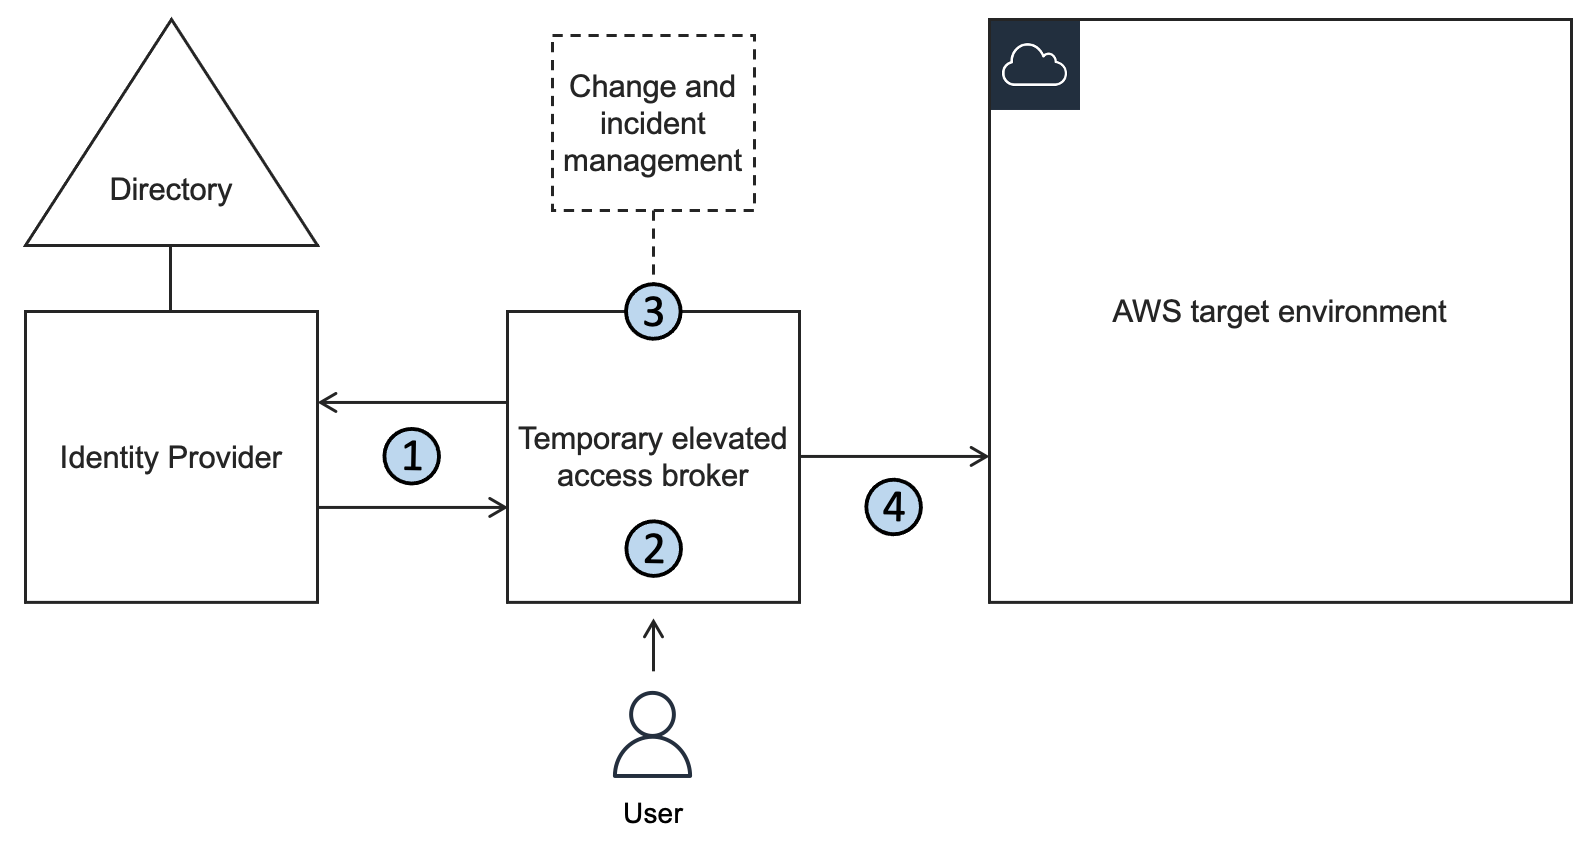 Managing temporary elevated usage of your AWS environment